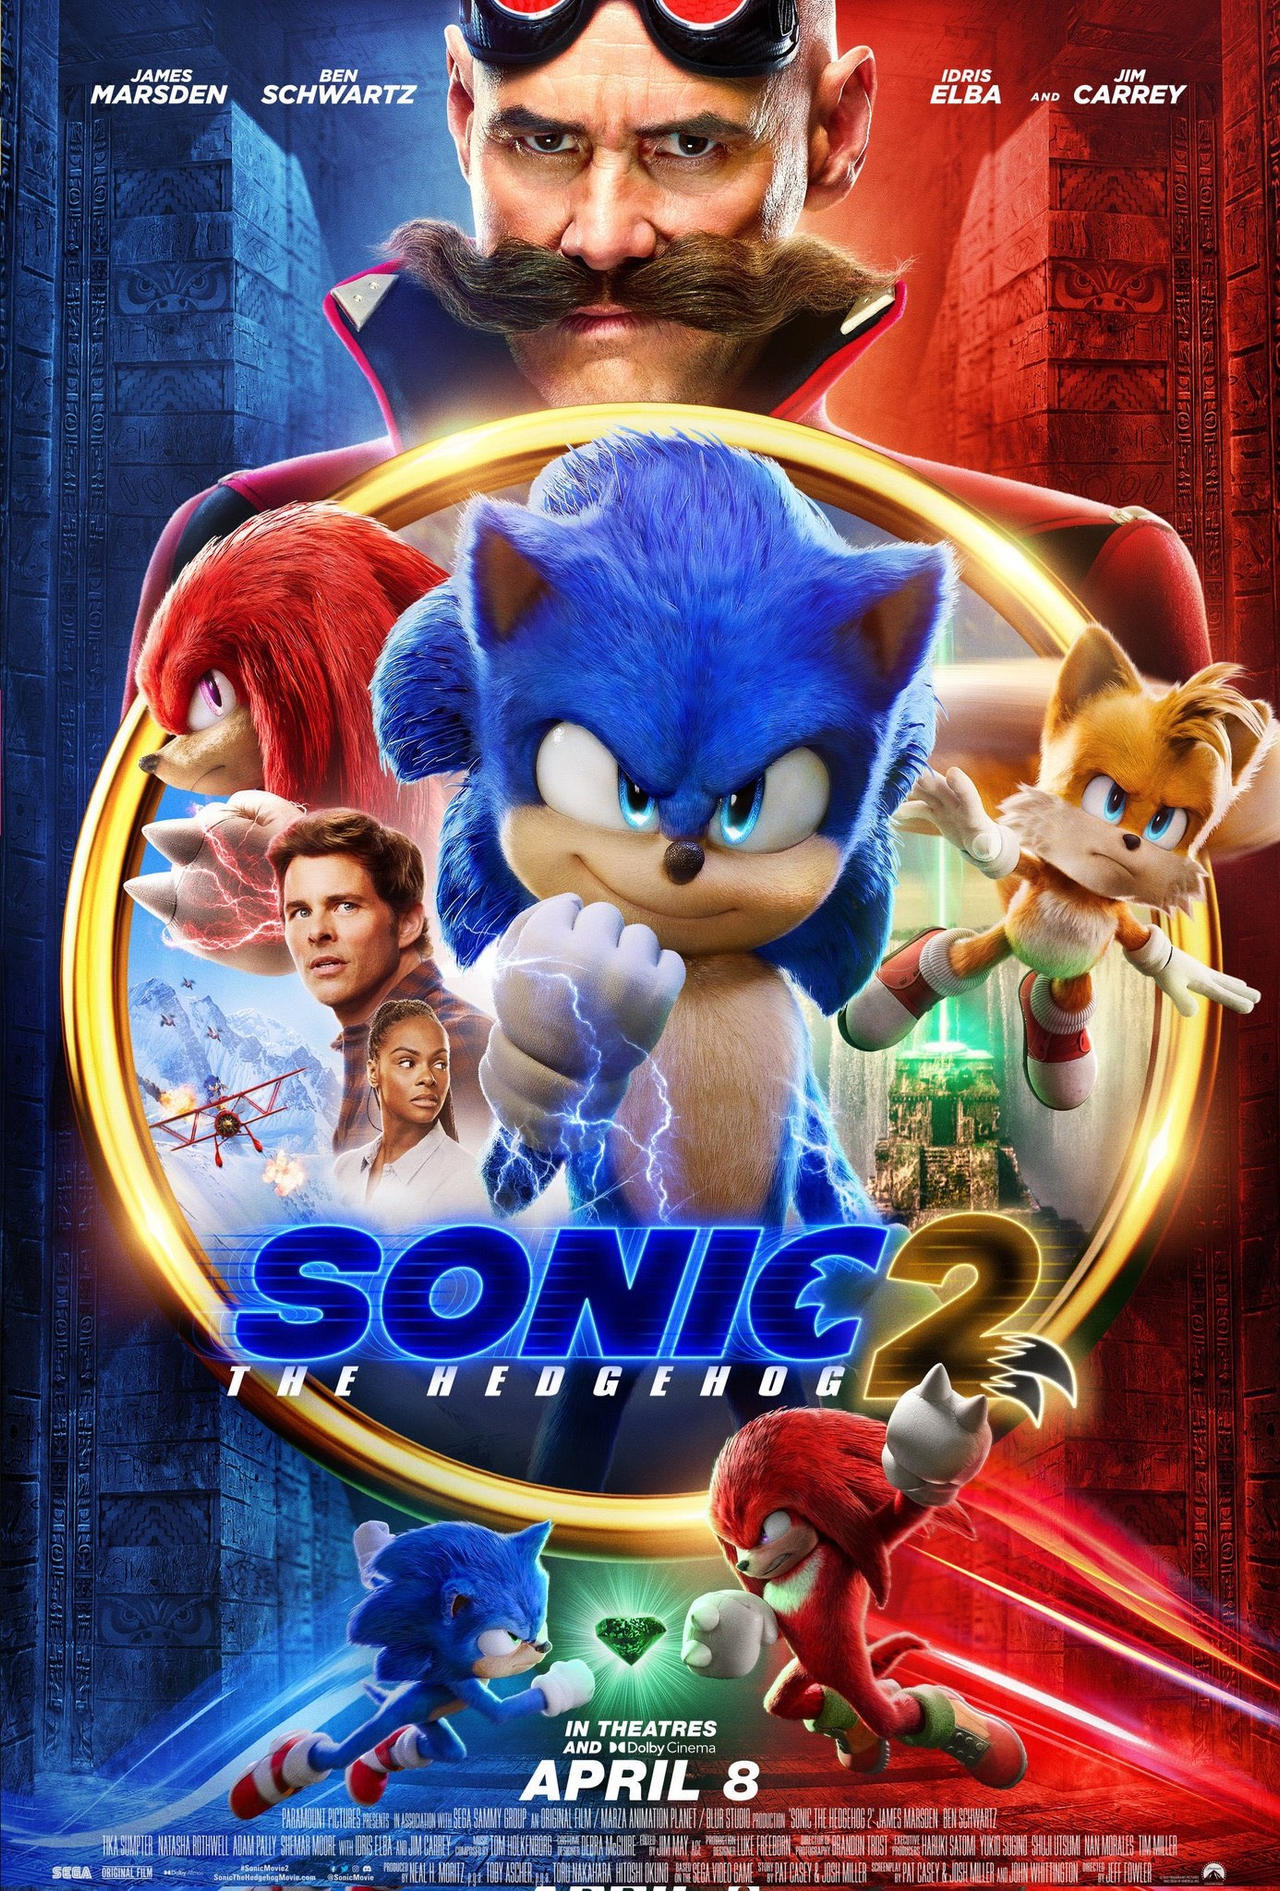 Sonic the Hedgehog 2 movie poster  Sonic, Sonic art, Silver the hedgehog